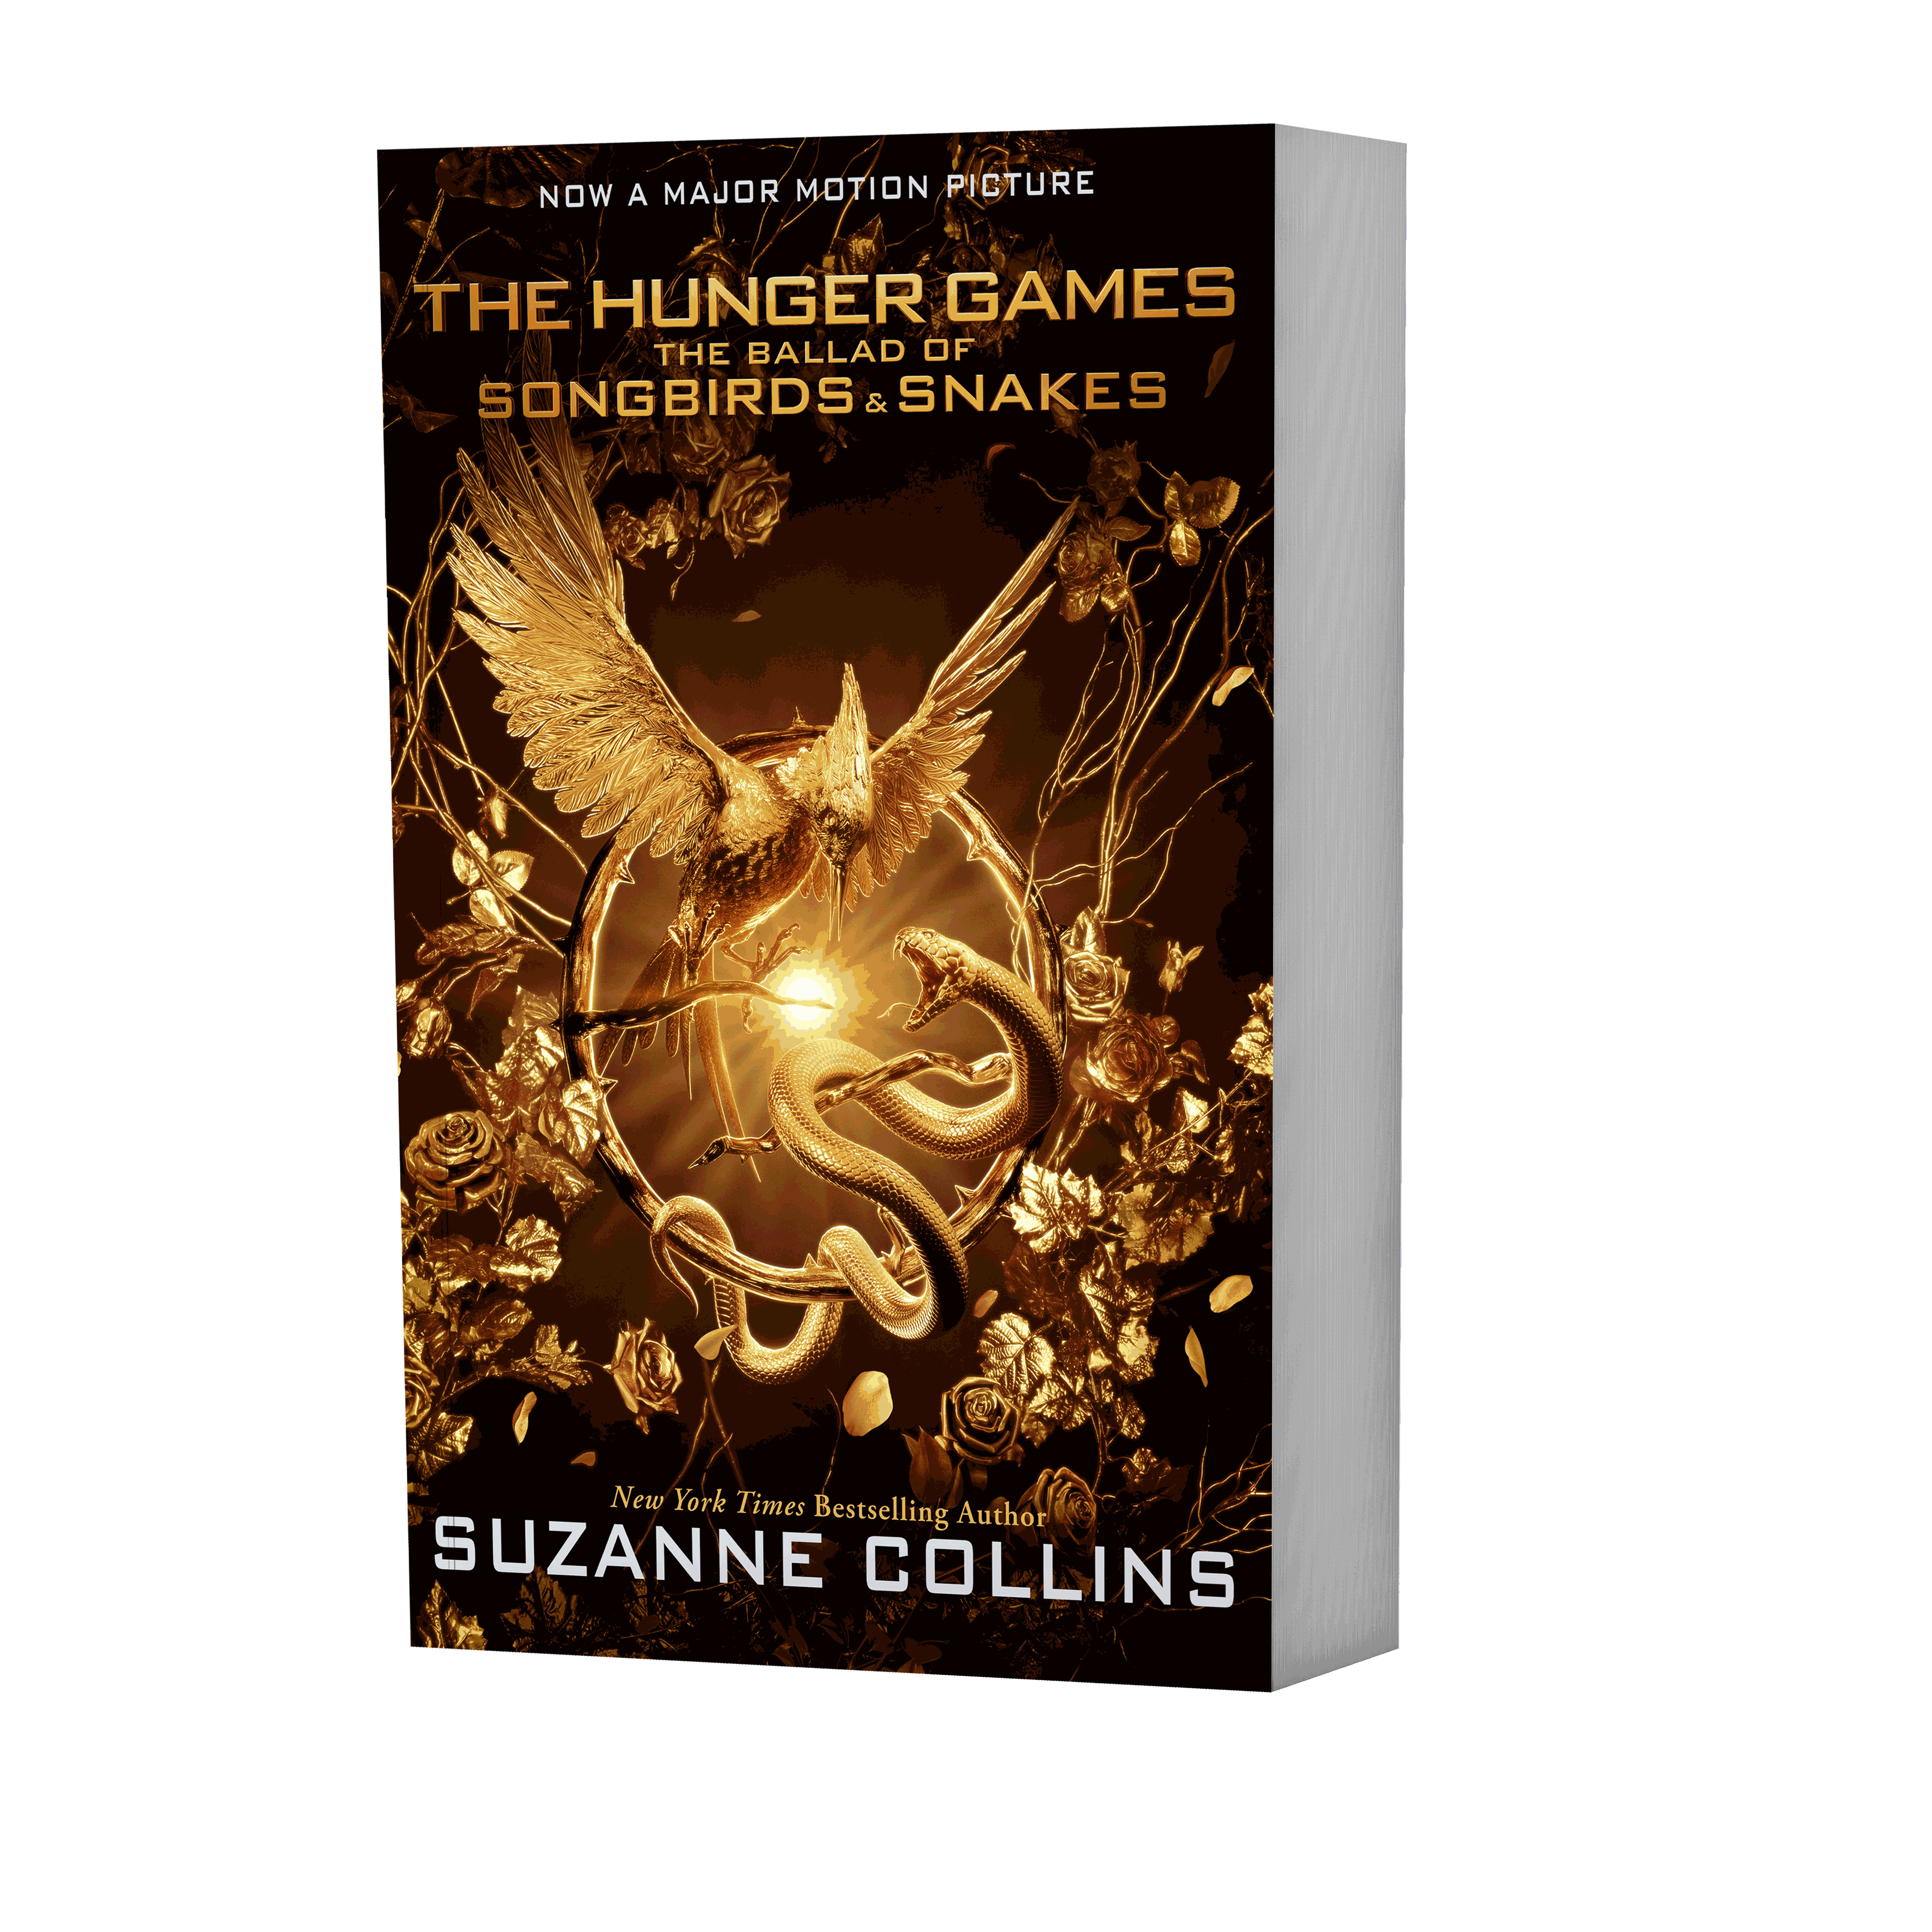 the hunger games: awards, notables, & best book - Scholastic Media